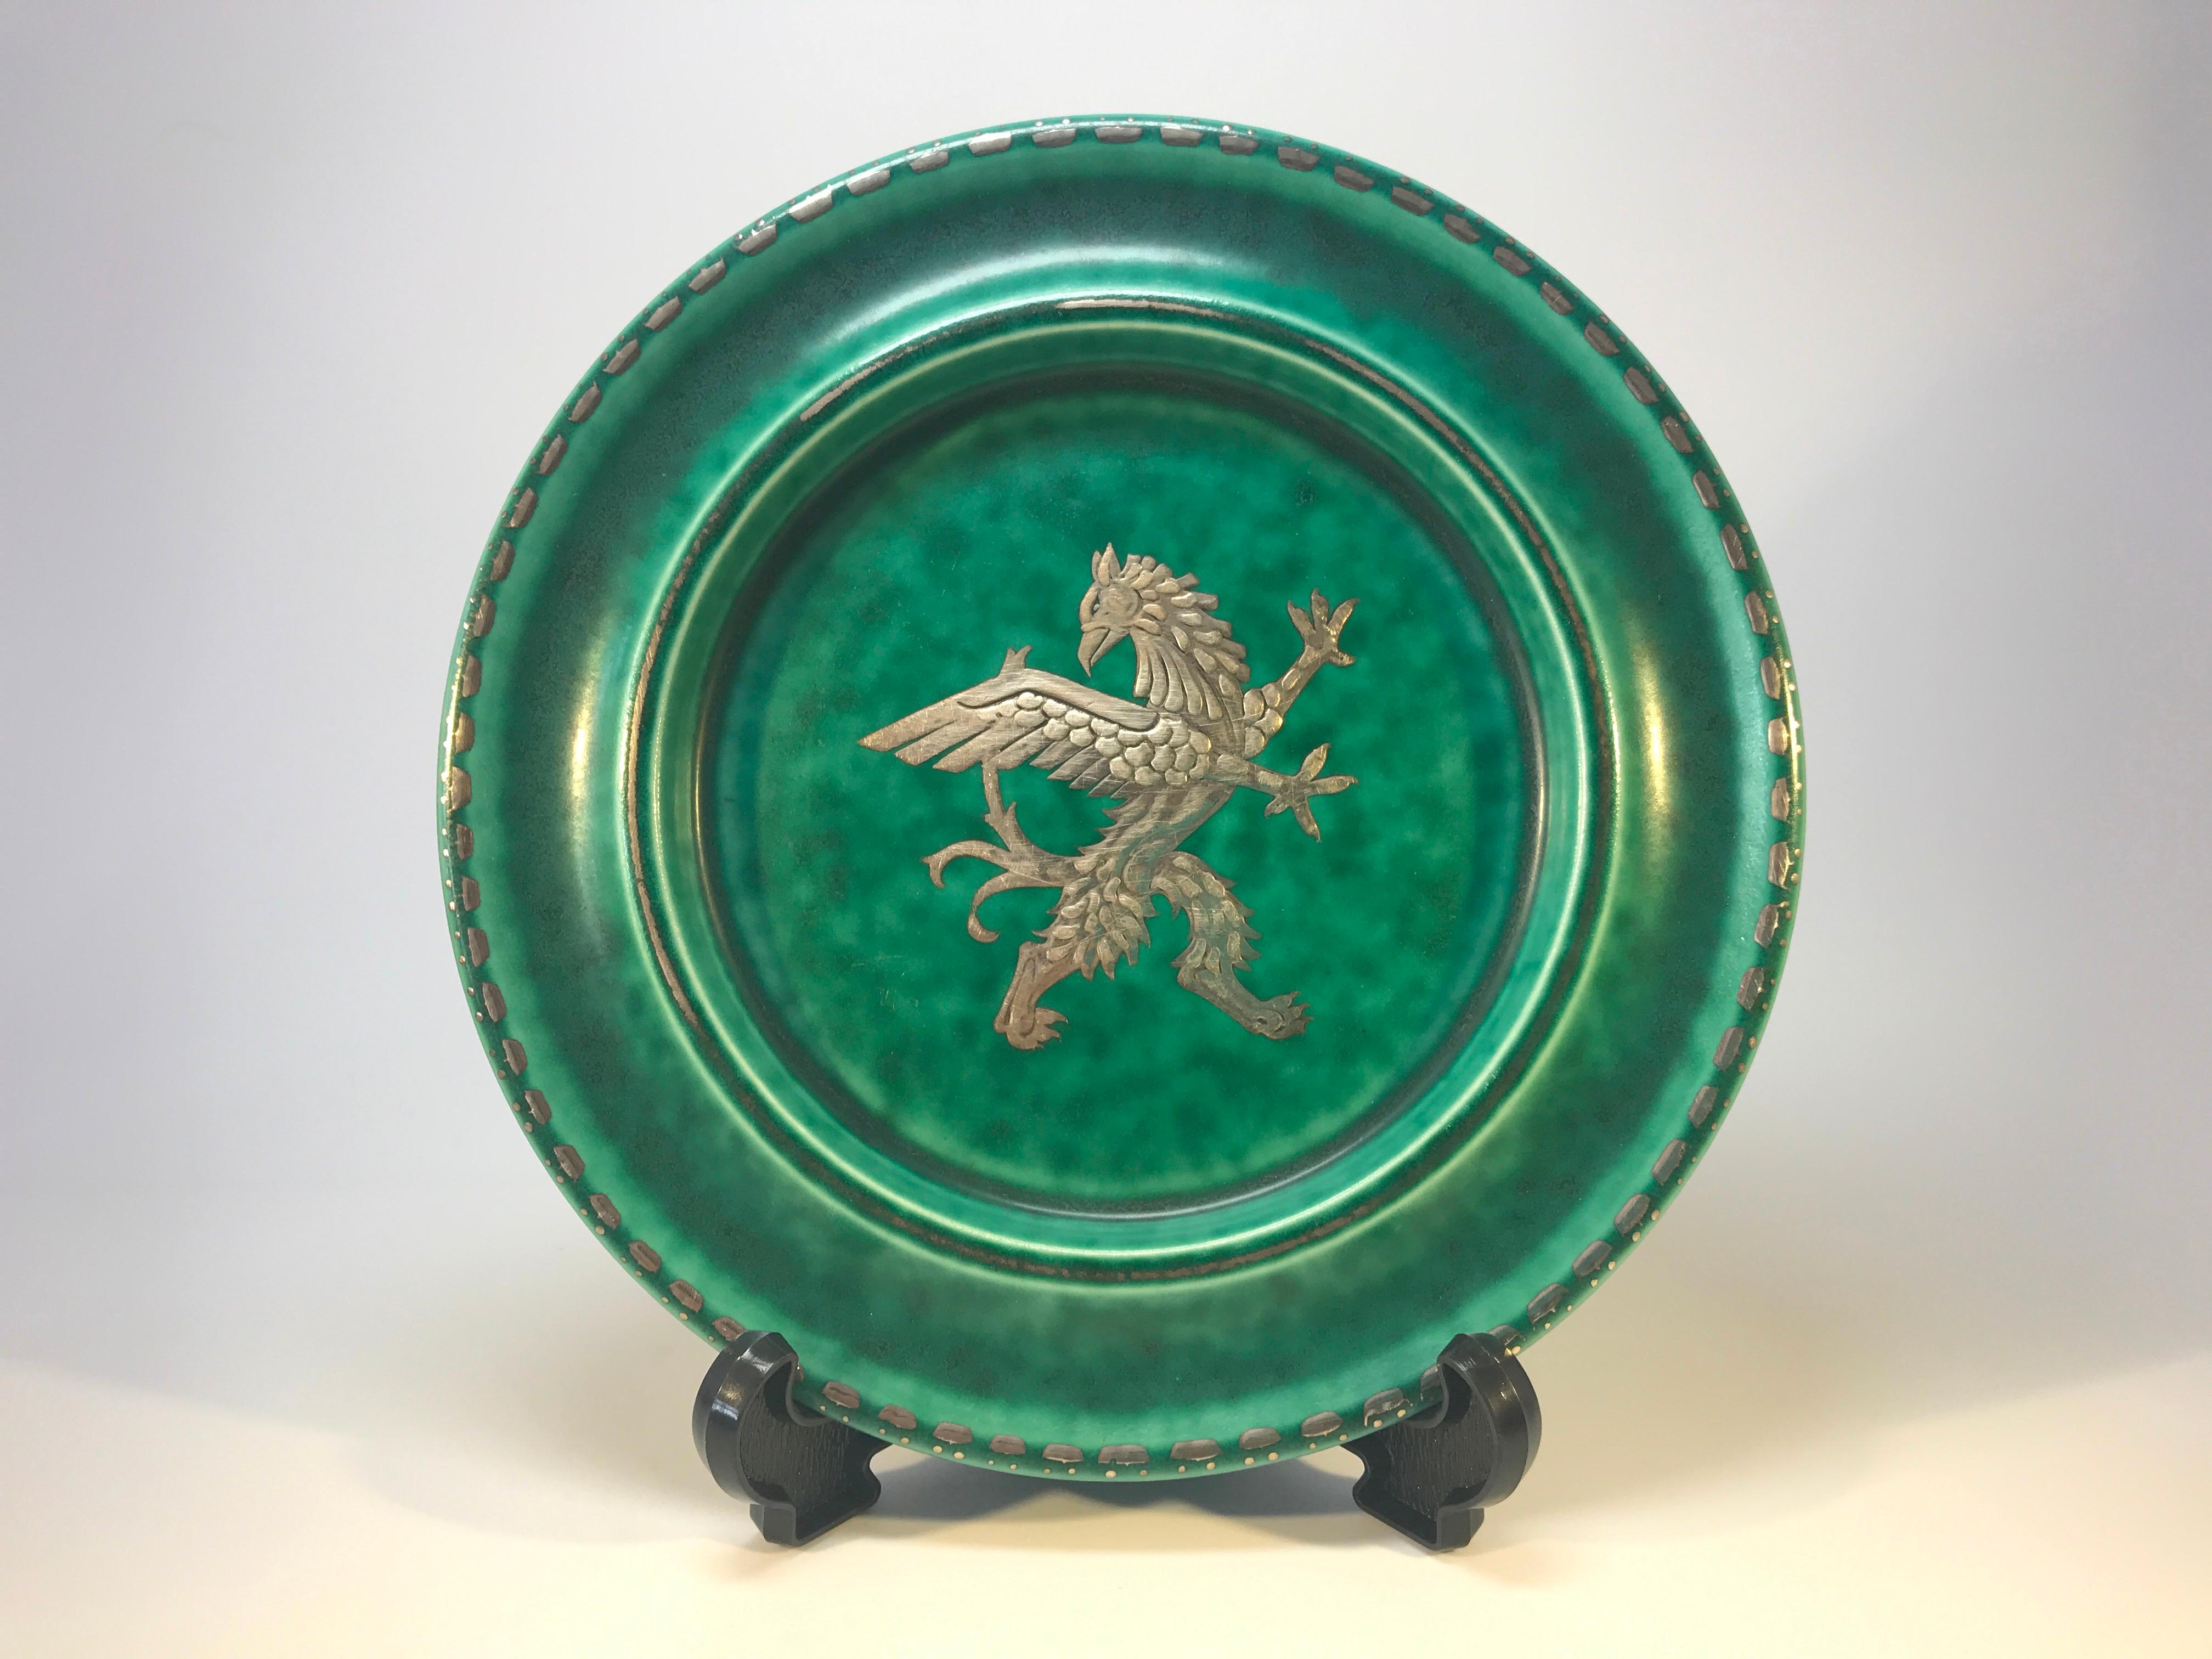 Decorative and vibrant green raised plate with applied silver decoration of a winged griffon by Wilhelm Kage for Gustavsberg, Sweden, circa 1930s
Stamped Argenta on reverse
Good condition. Some wear to the silver of inner rim.